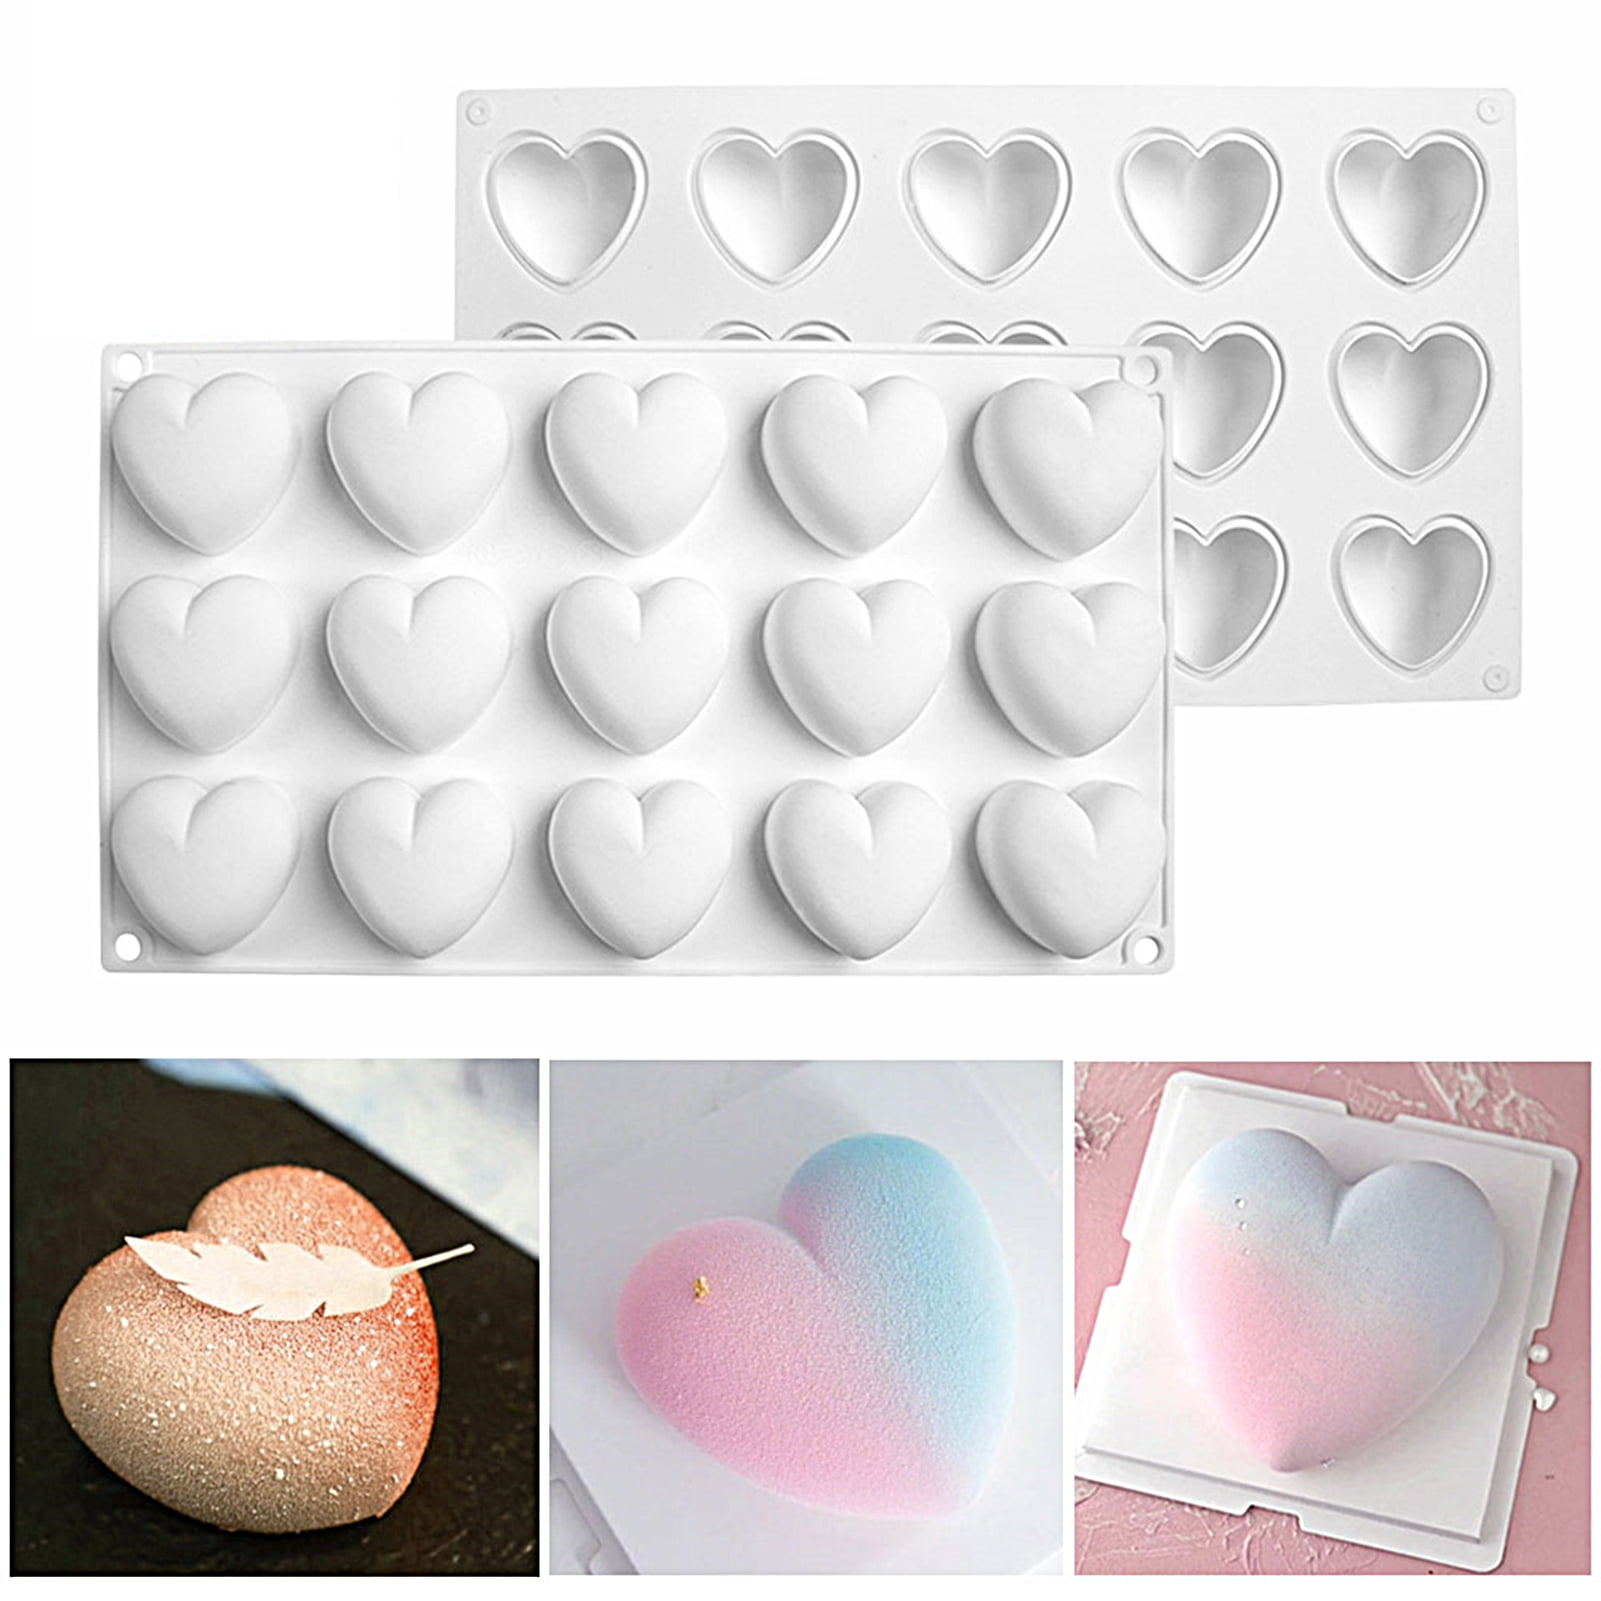 Details about   Silicone 3D Heart Shape 6 Cavity Cake Mold Fondant Chocolate Baking Moulds Tool 